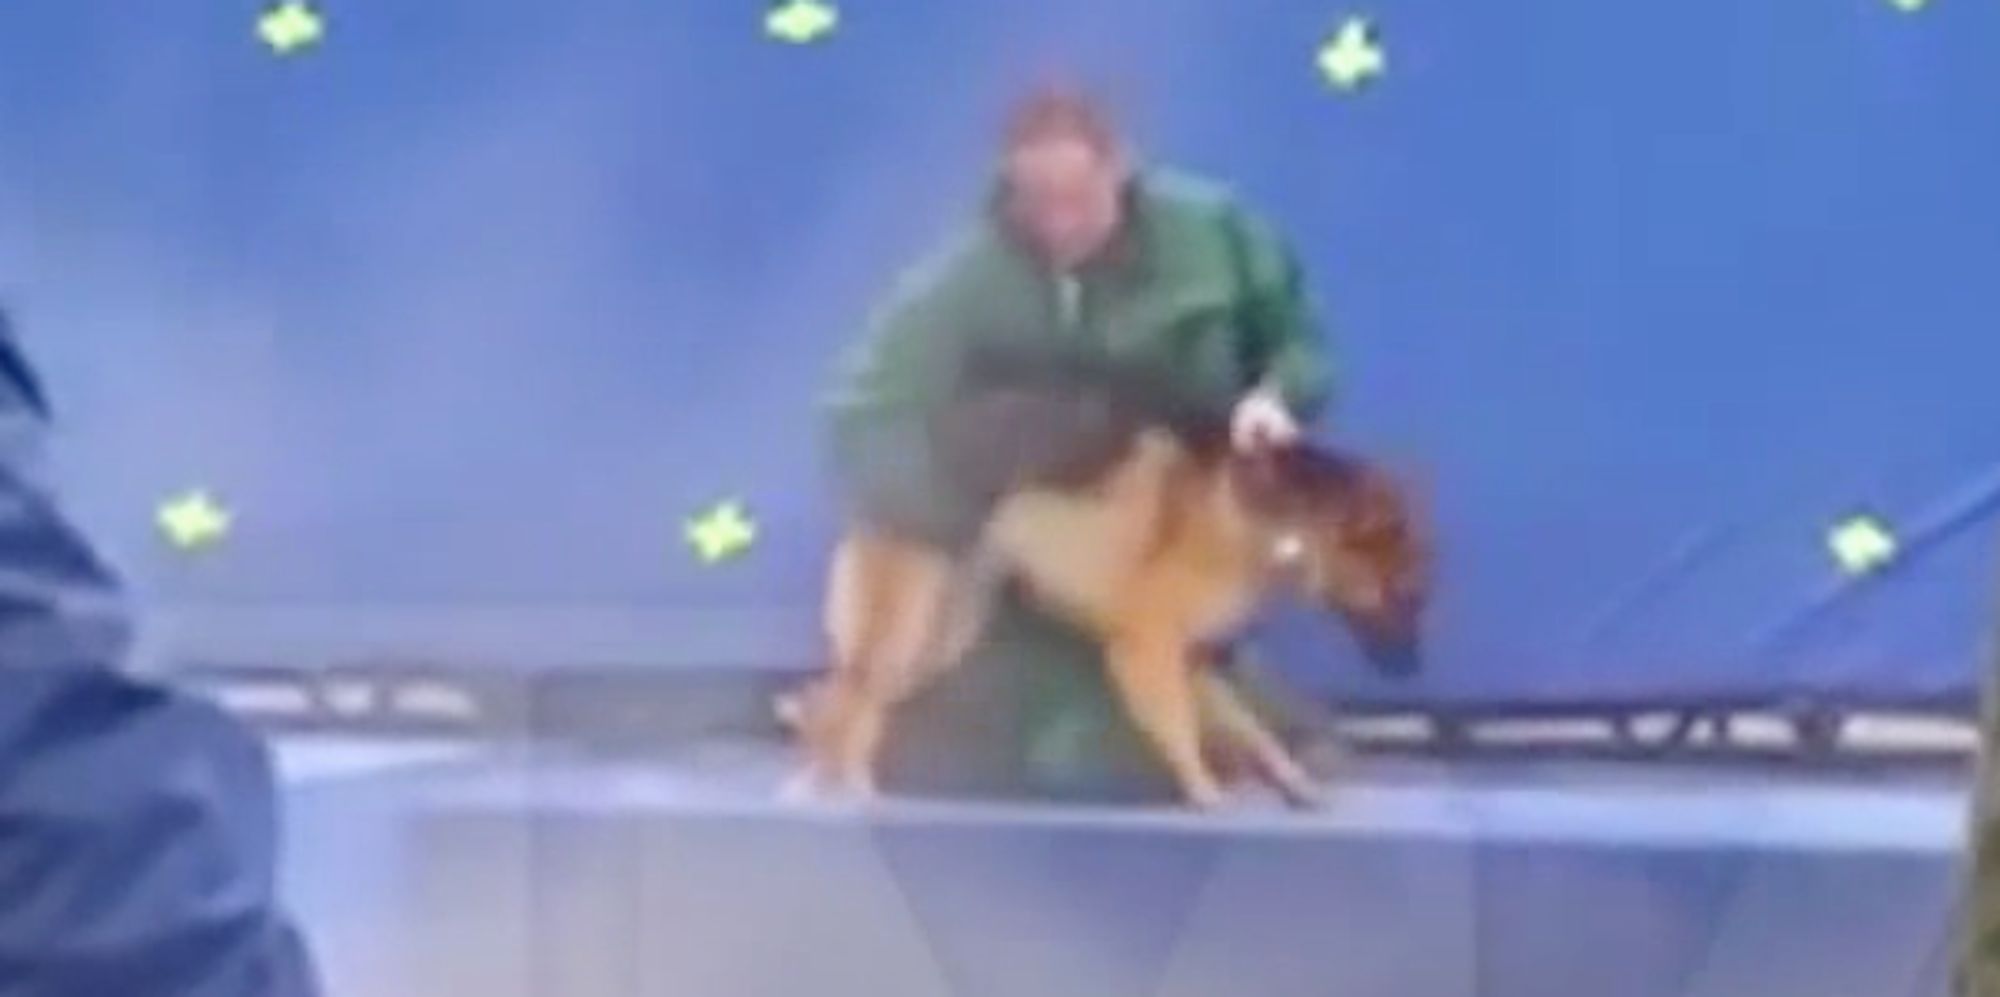 Leaked Video From 'A Dog's Purpose' Set Calls Film's Treatment Of Animals Into Question (UPDATE) - Huffington Post